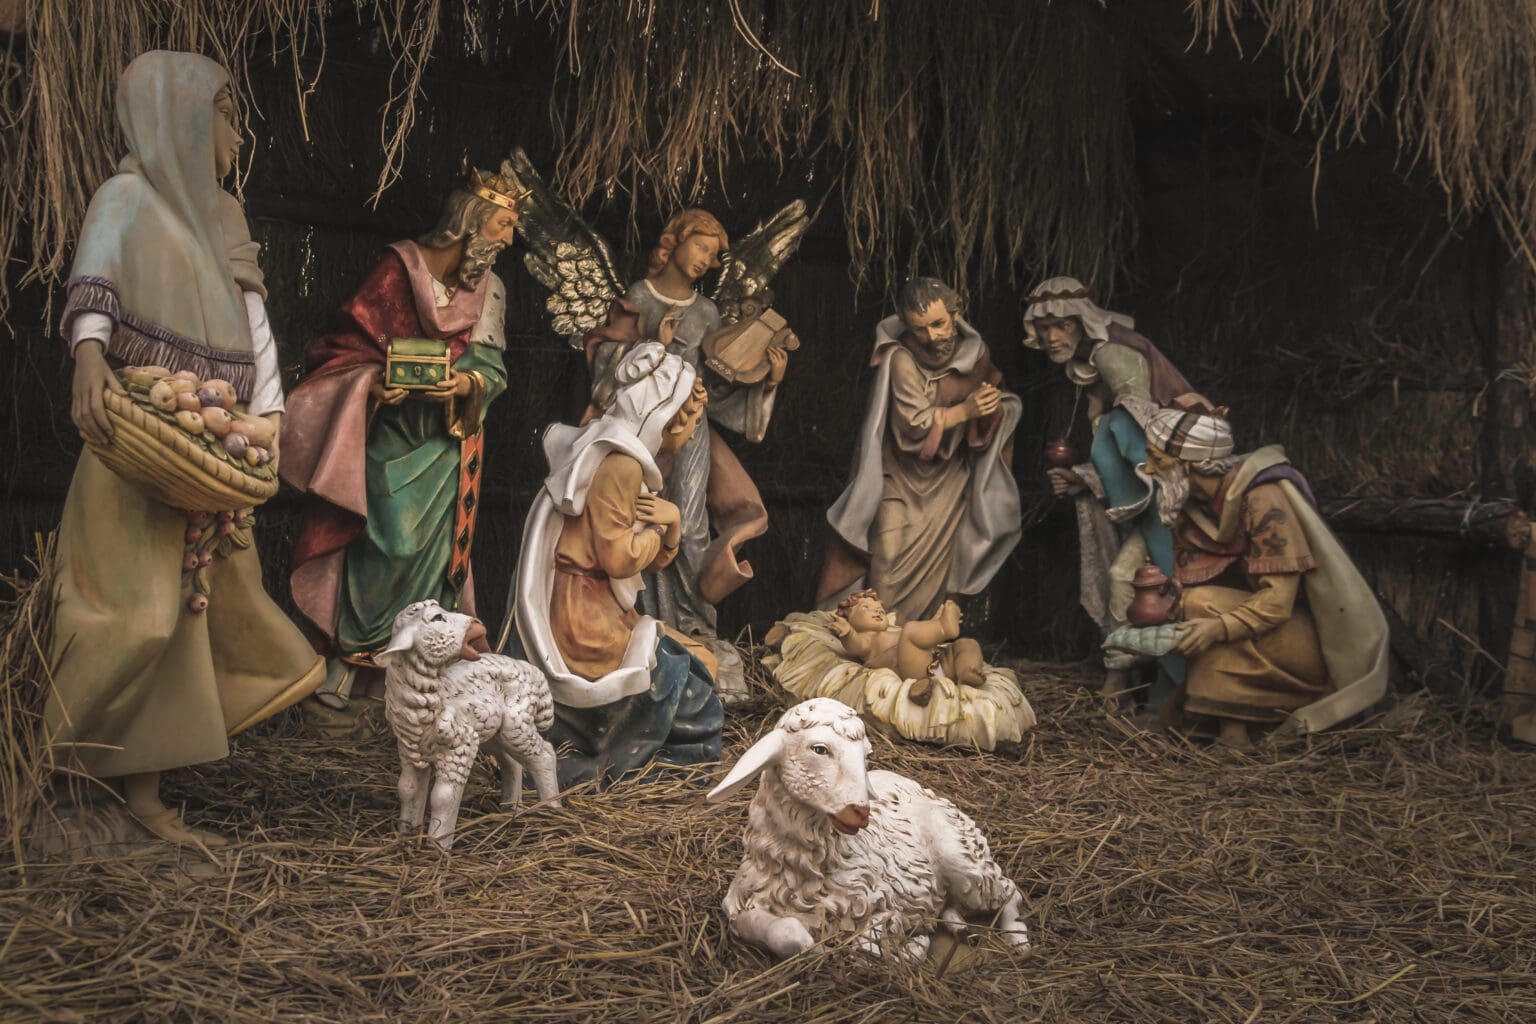 Nativity Plays in Hungary